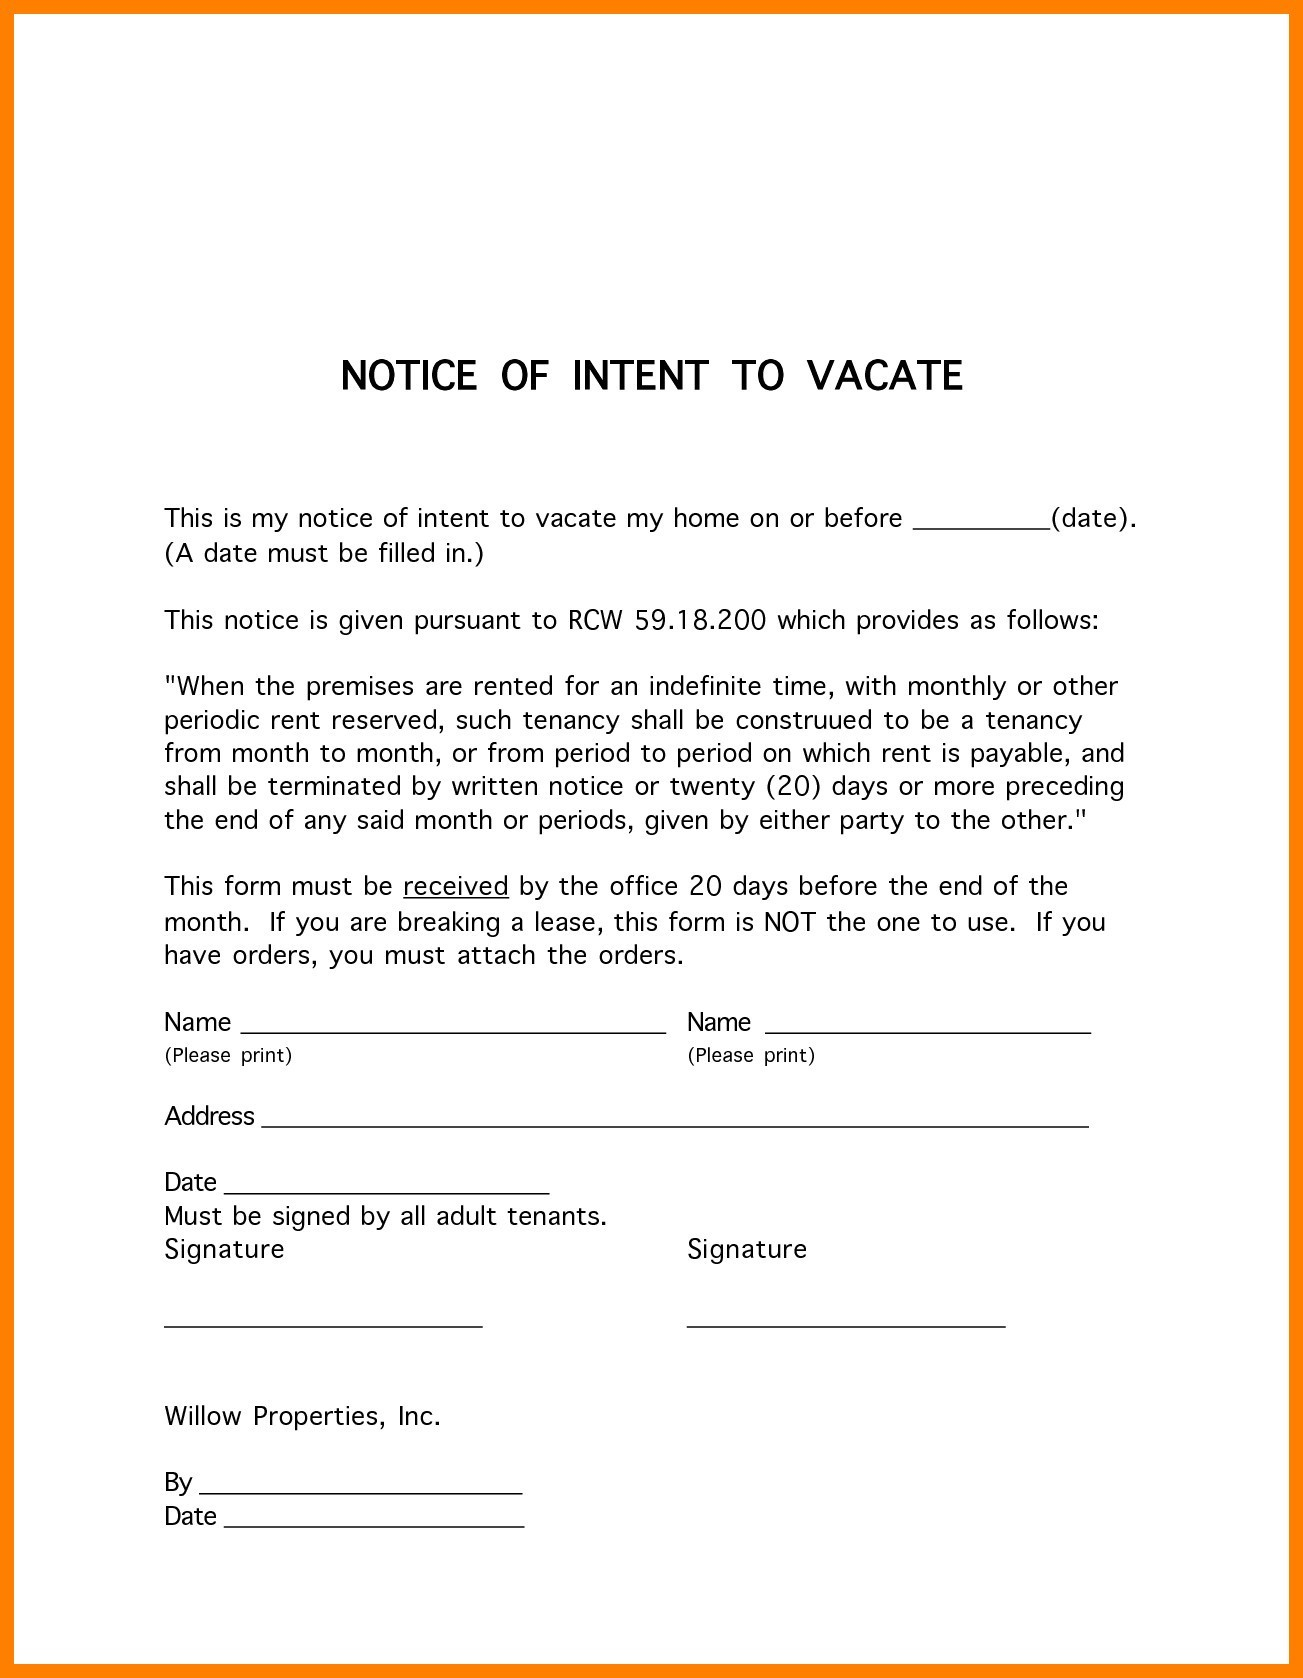 Notice Letter to Tenant From Landlord Template - Template Letter to Leave Property Best Notice to Vacate Apartment